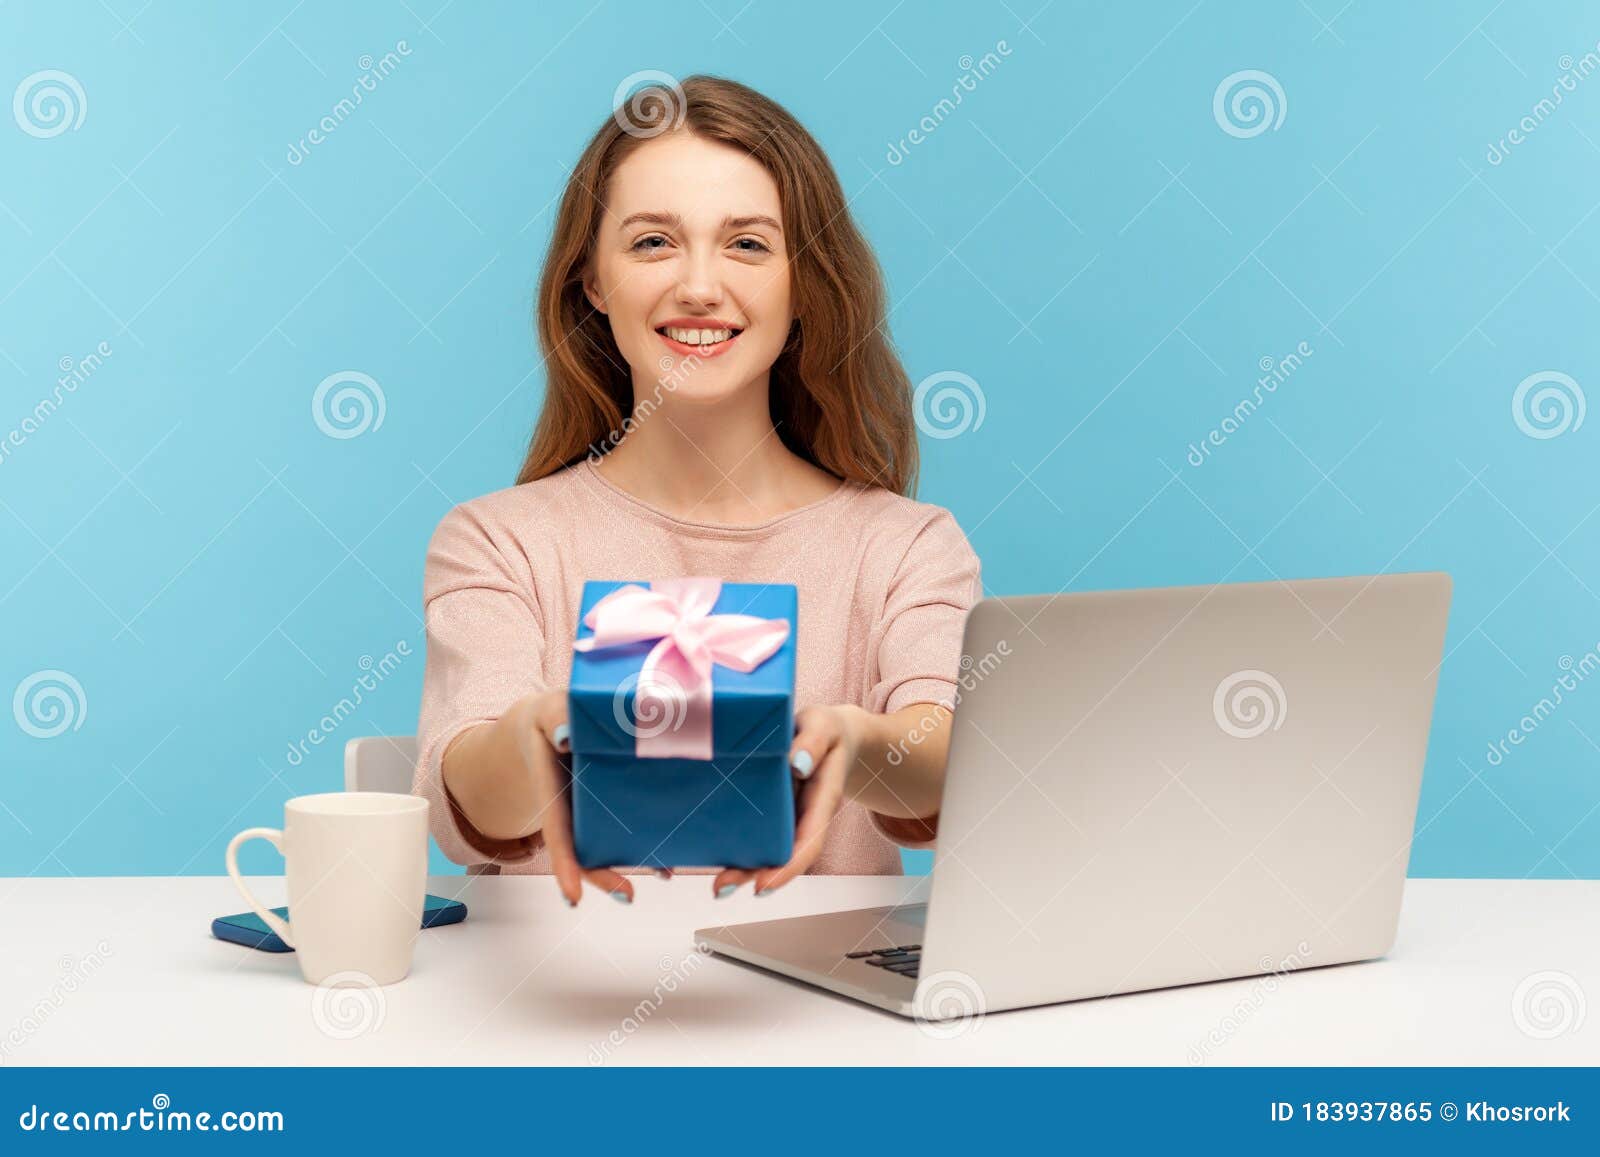 Charming Woman Employee Sitting at Workplace with Laptop and Holding ...